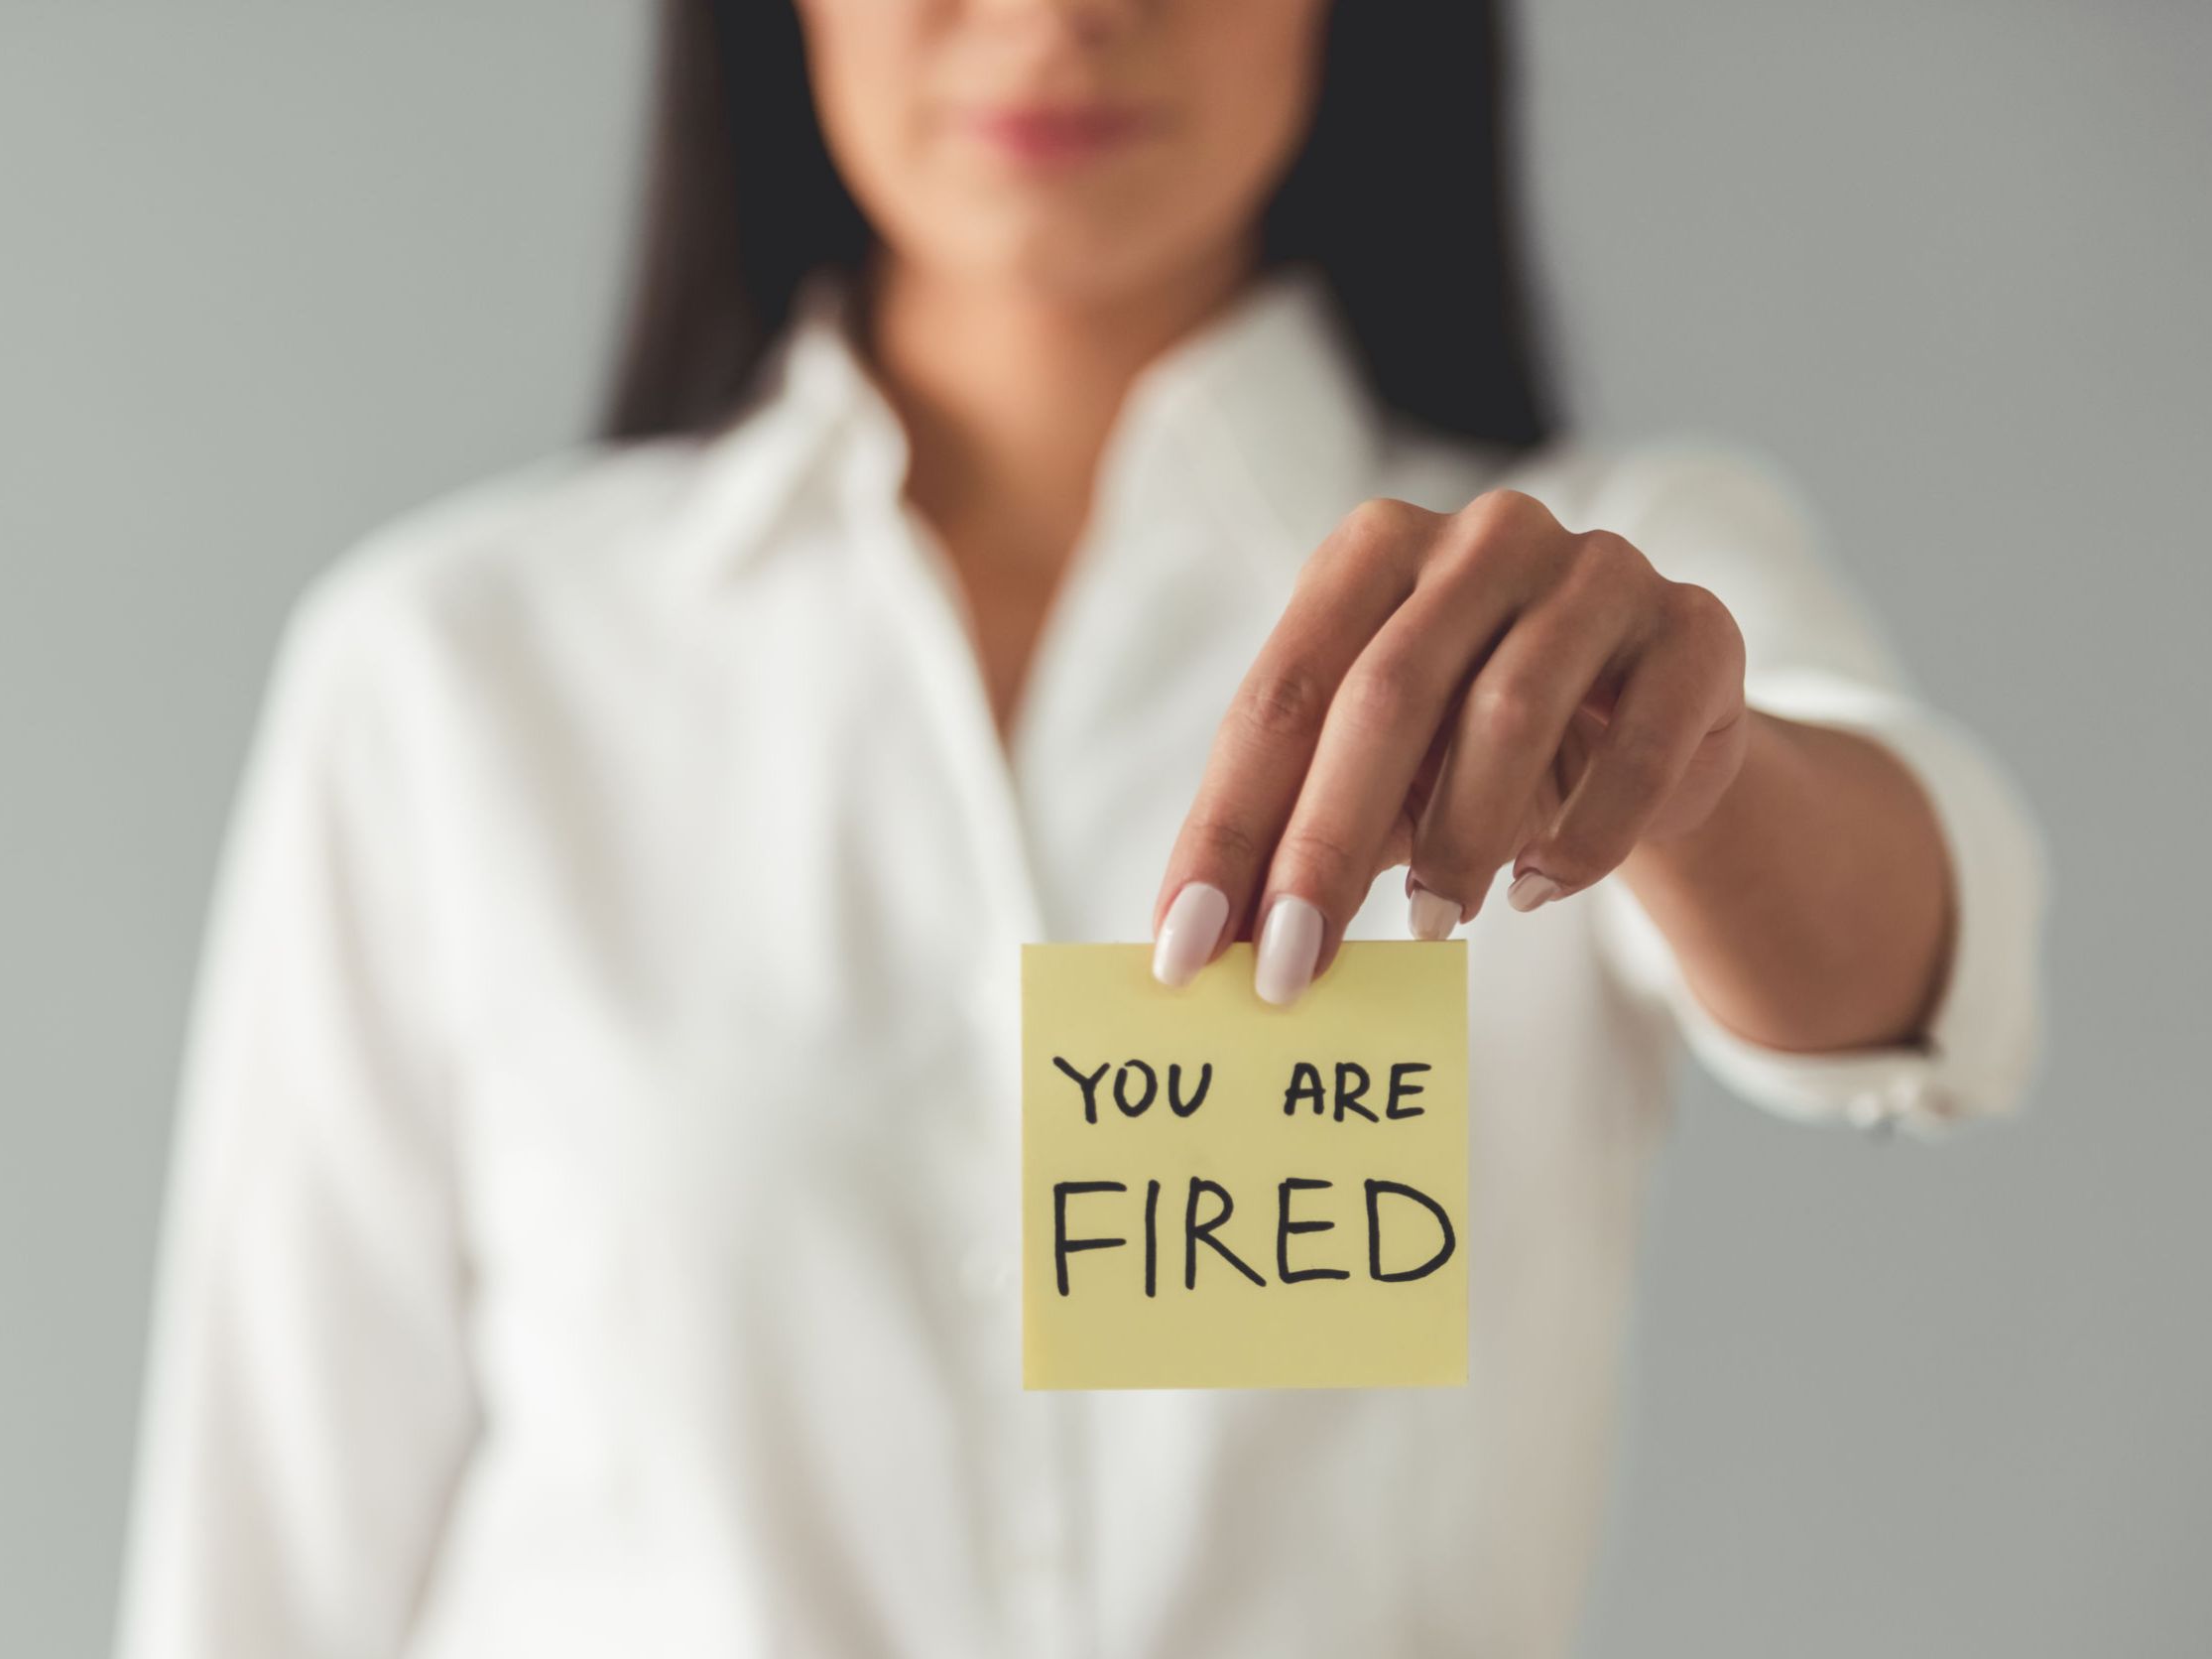 The Gender Disparity of CEO Hiring and Firing